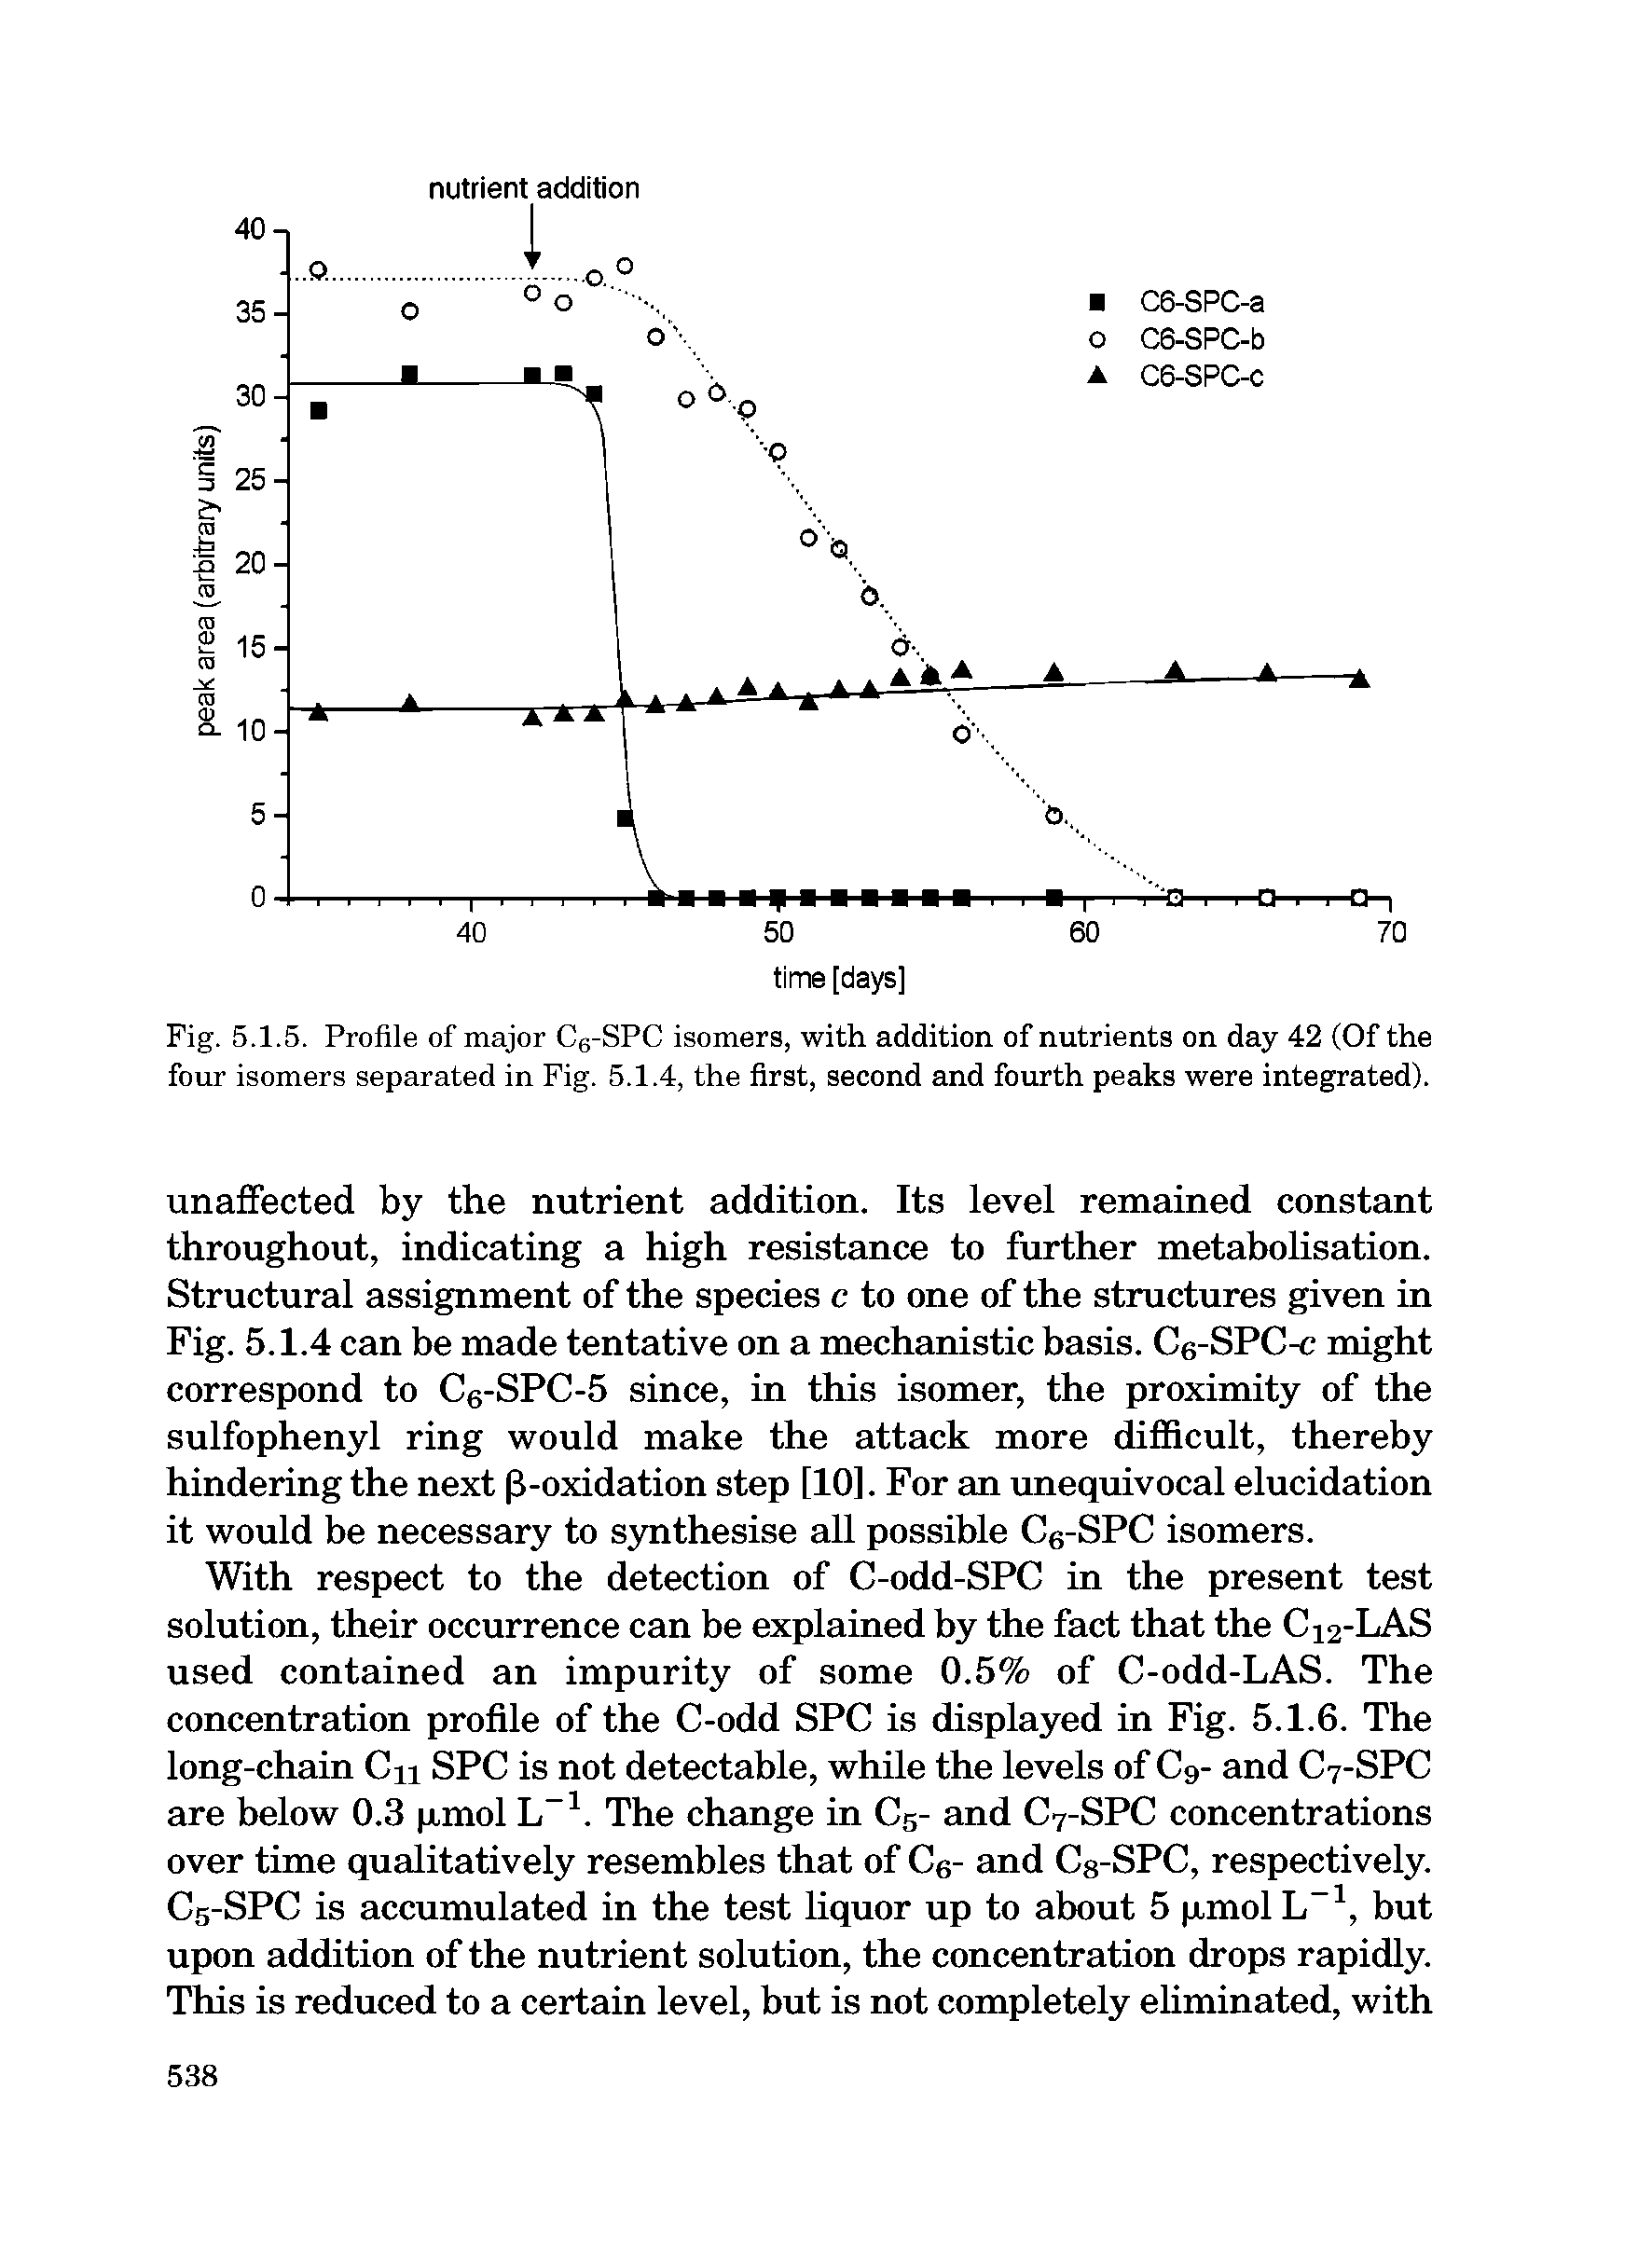 Fig. 5.1.5. Profile of major C6-SPC isomers, with addition of nutrients on day 42 (Of the four isomers separated in Fig. 5.1.4, the first, second and fourth peaks were integrated).